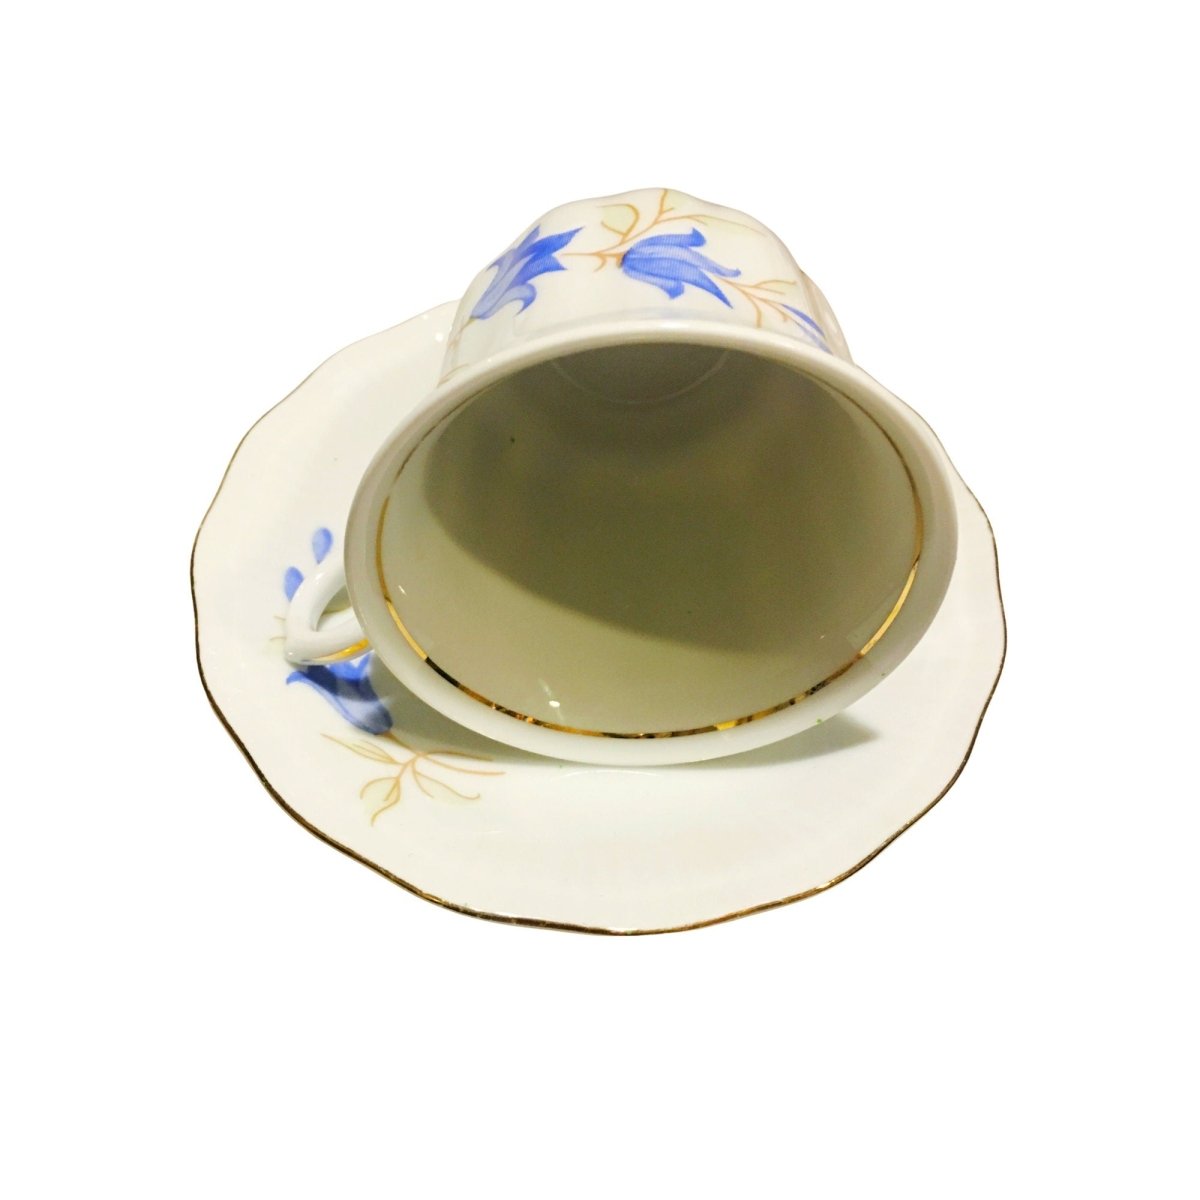 Royal Exclusive | Coffee Cup w. delicate harebells | Pastel blue with gold detail | Demitasse duo cup and saucer - Chinamania.shop